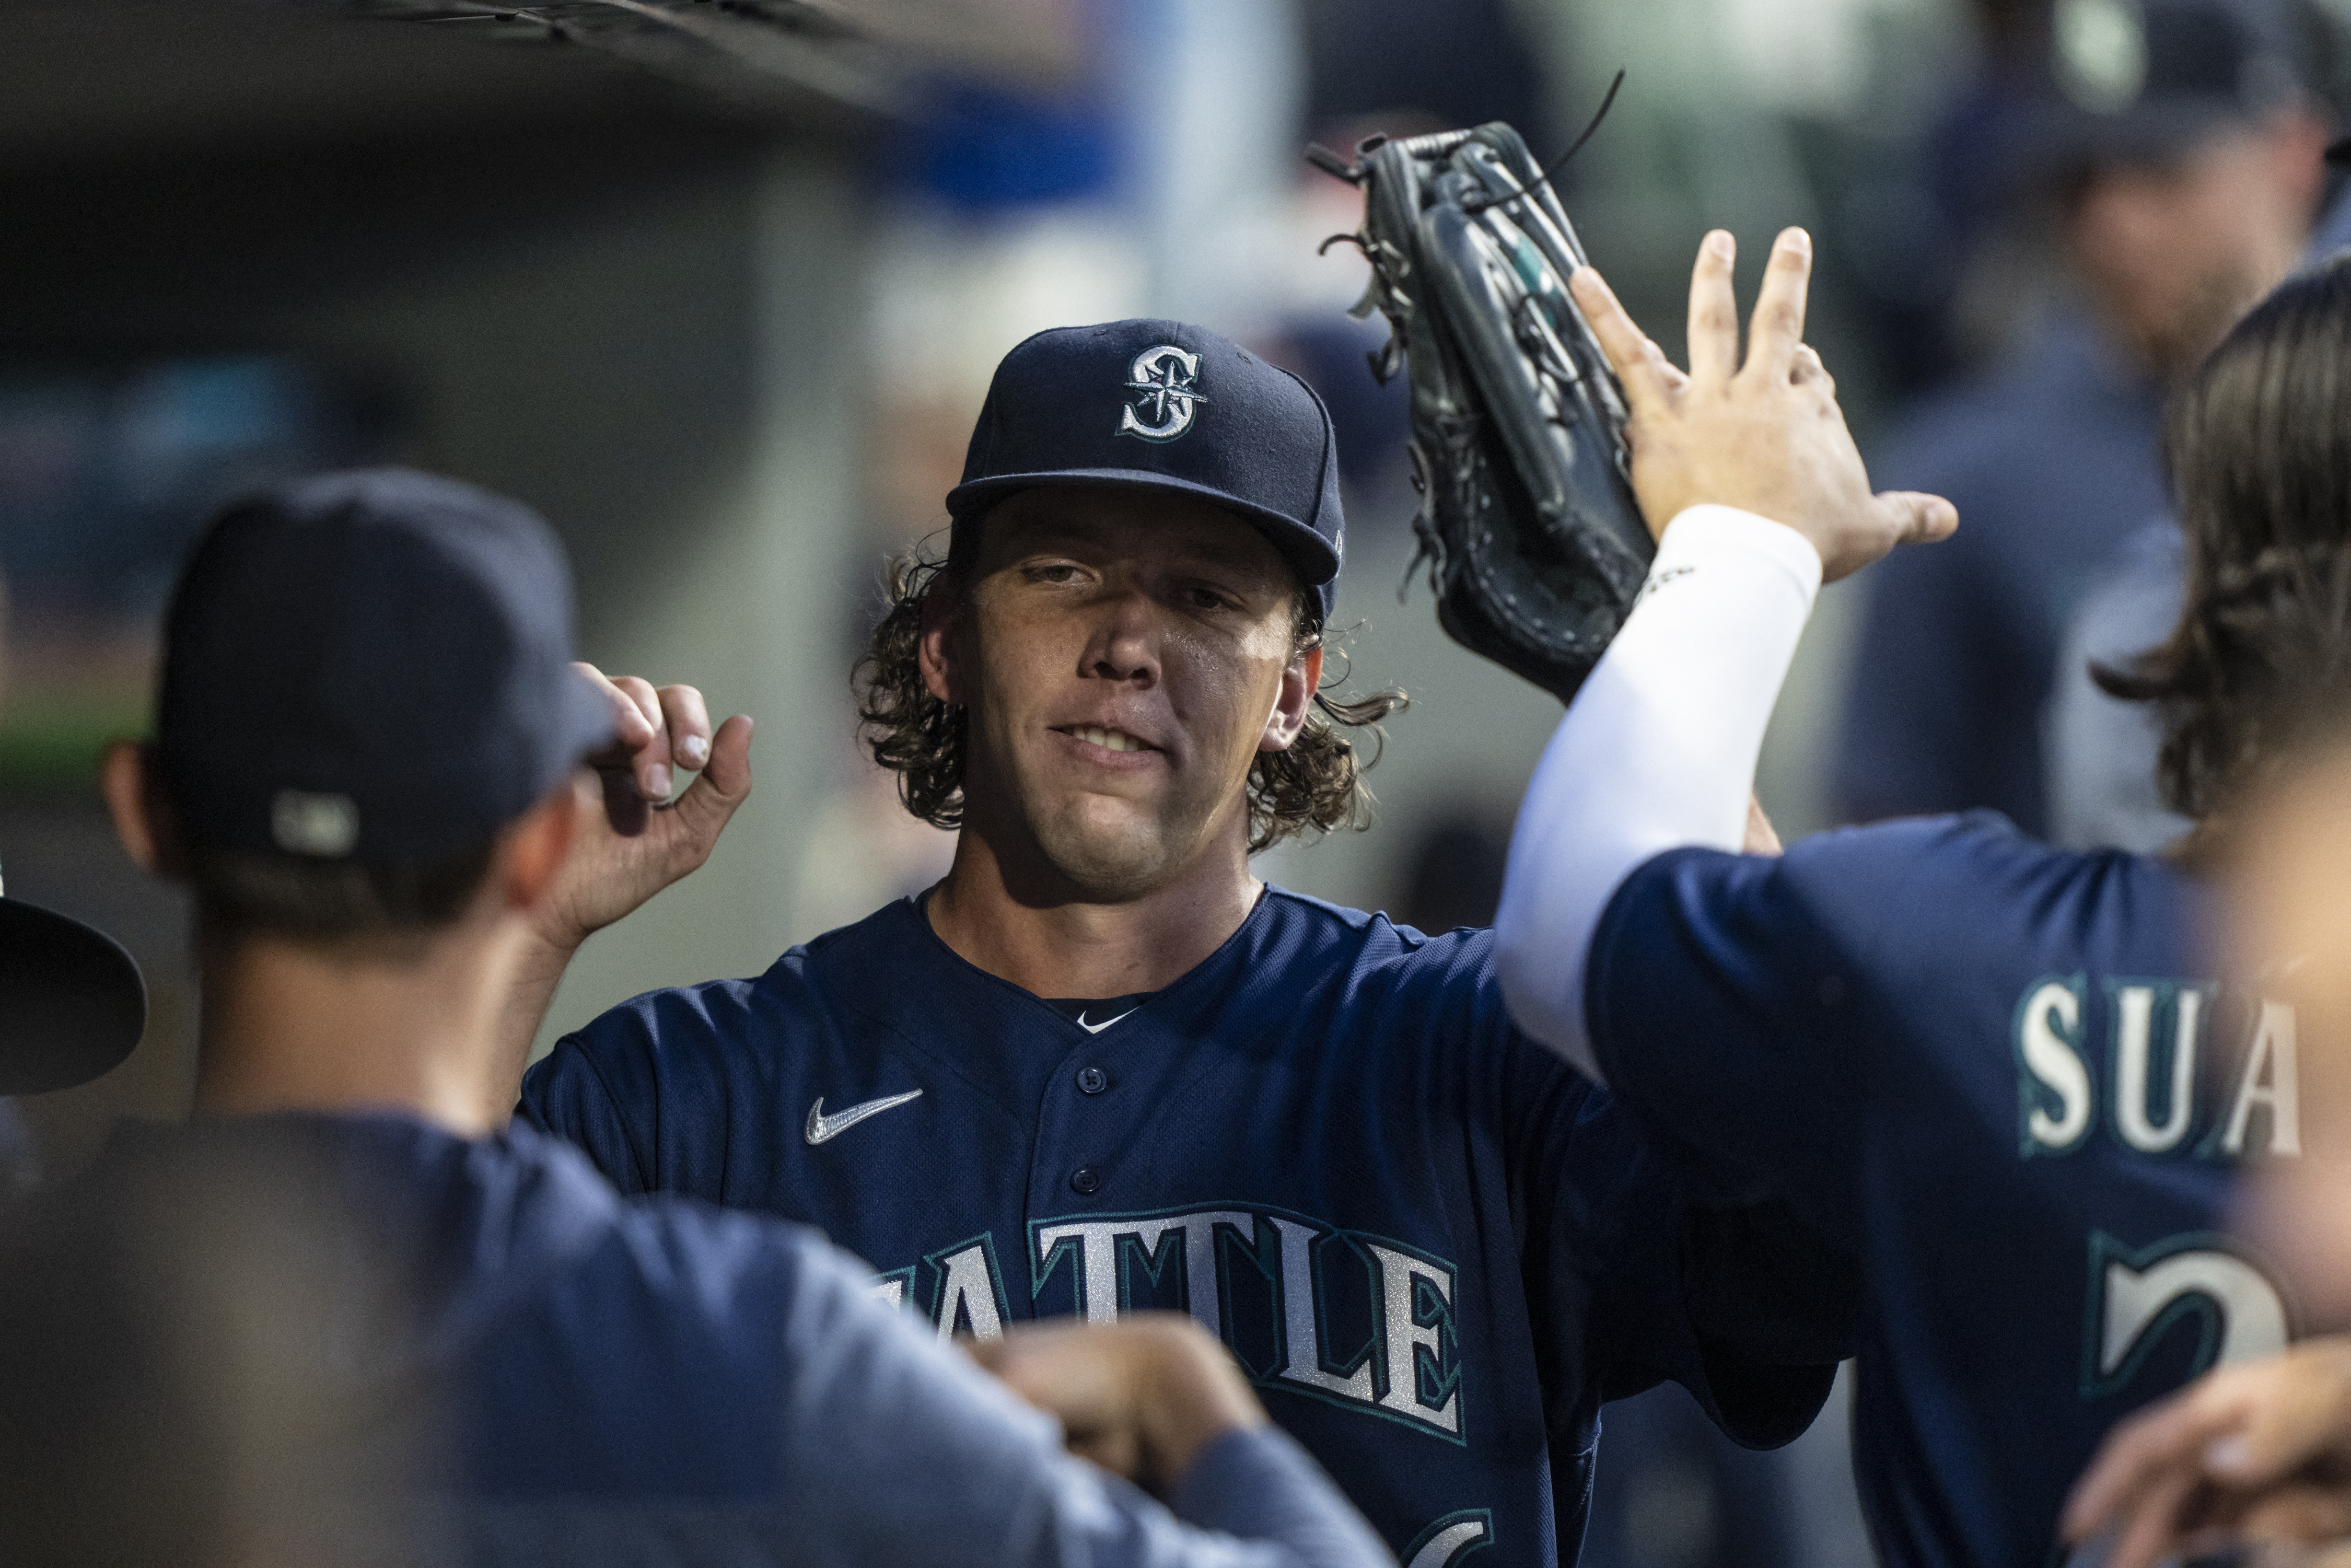 Gilbert allows just one baserunner as Mariners beat Padres for